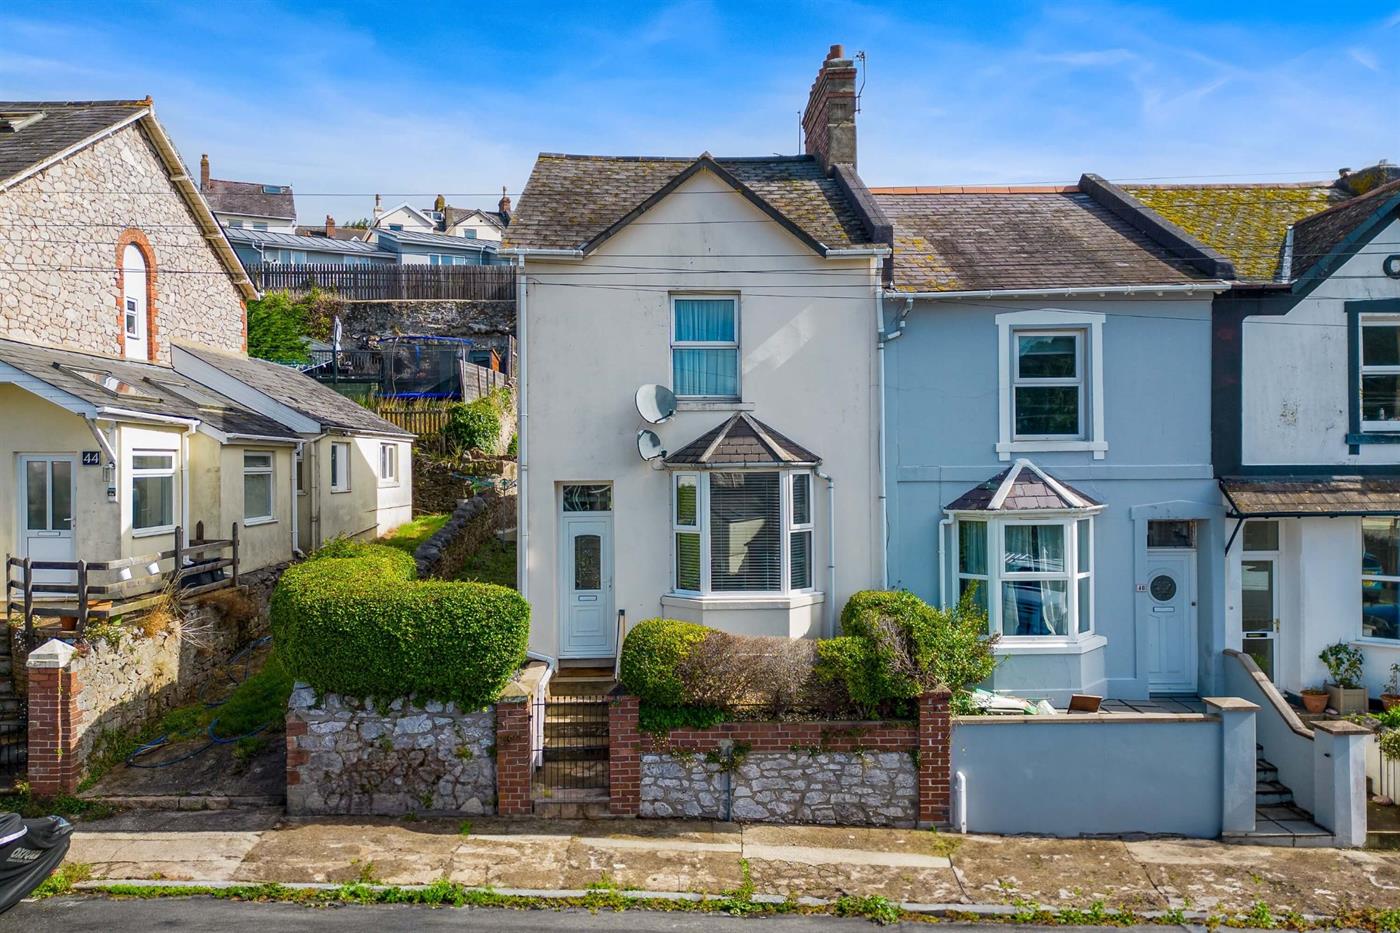 3 Bedroom End of Terrace House for Sale: Woodville Road, Torquay, TQ1 1LP